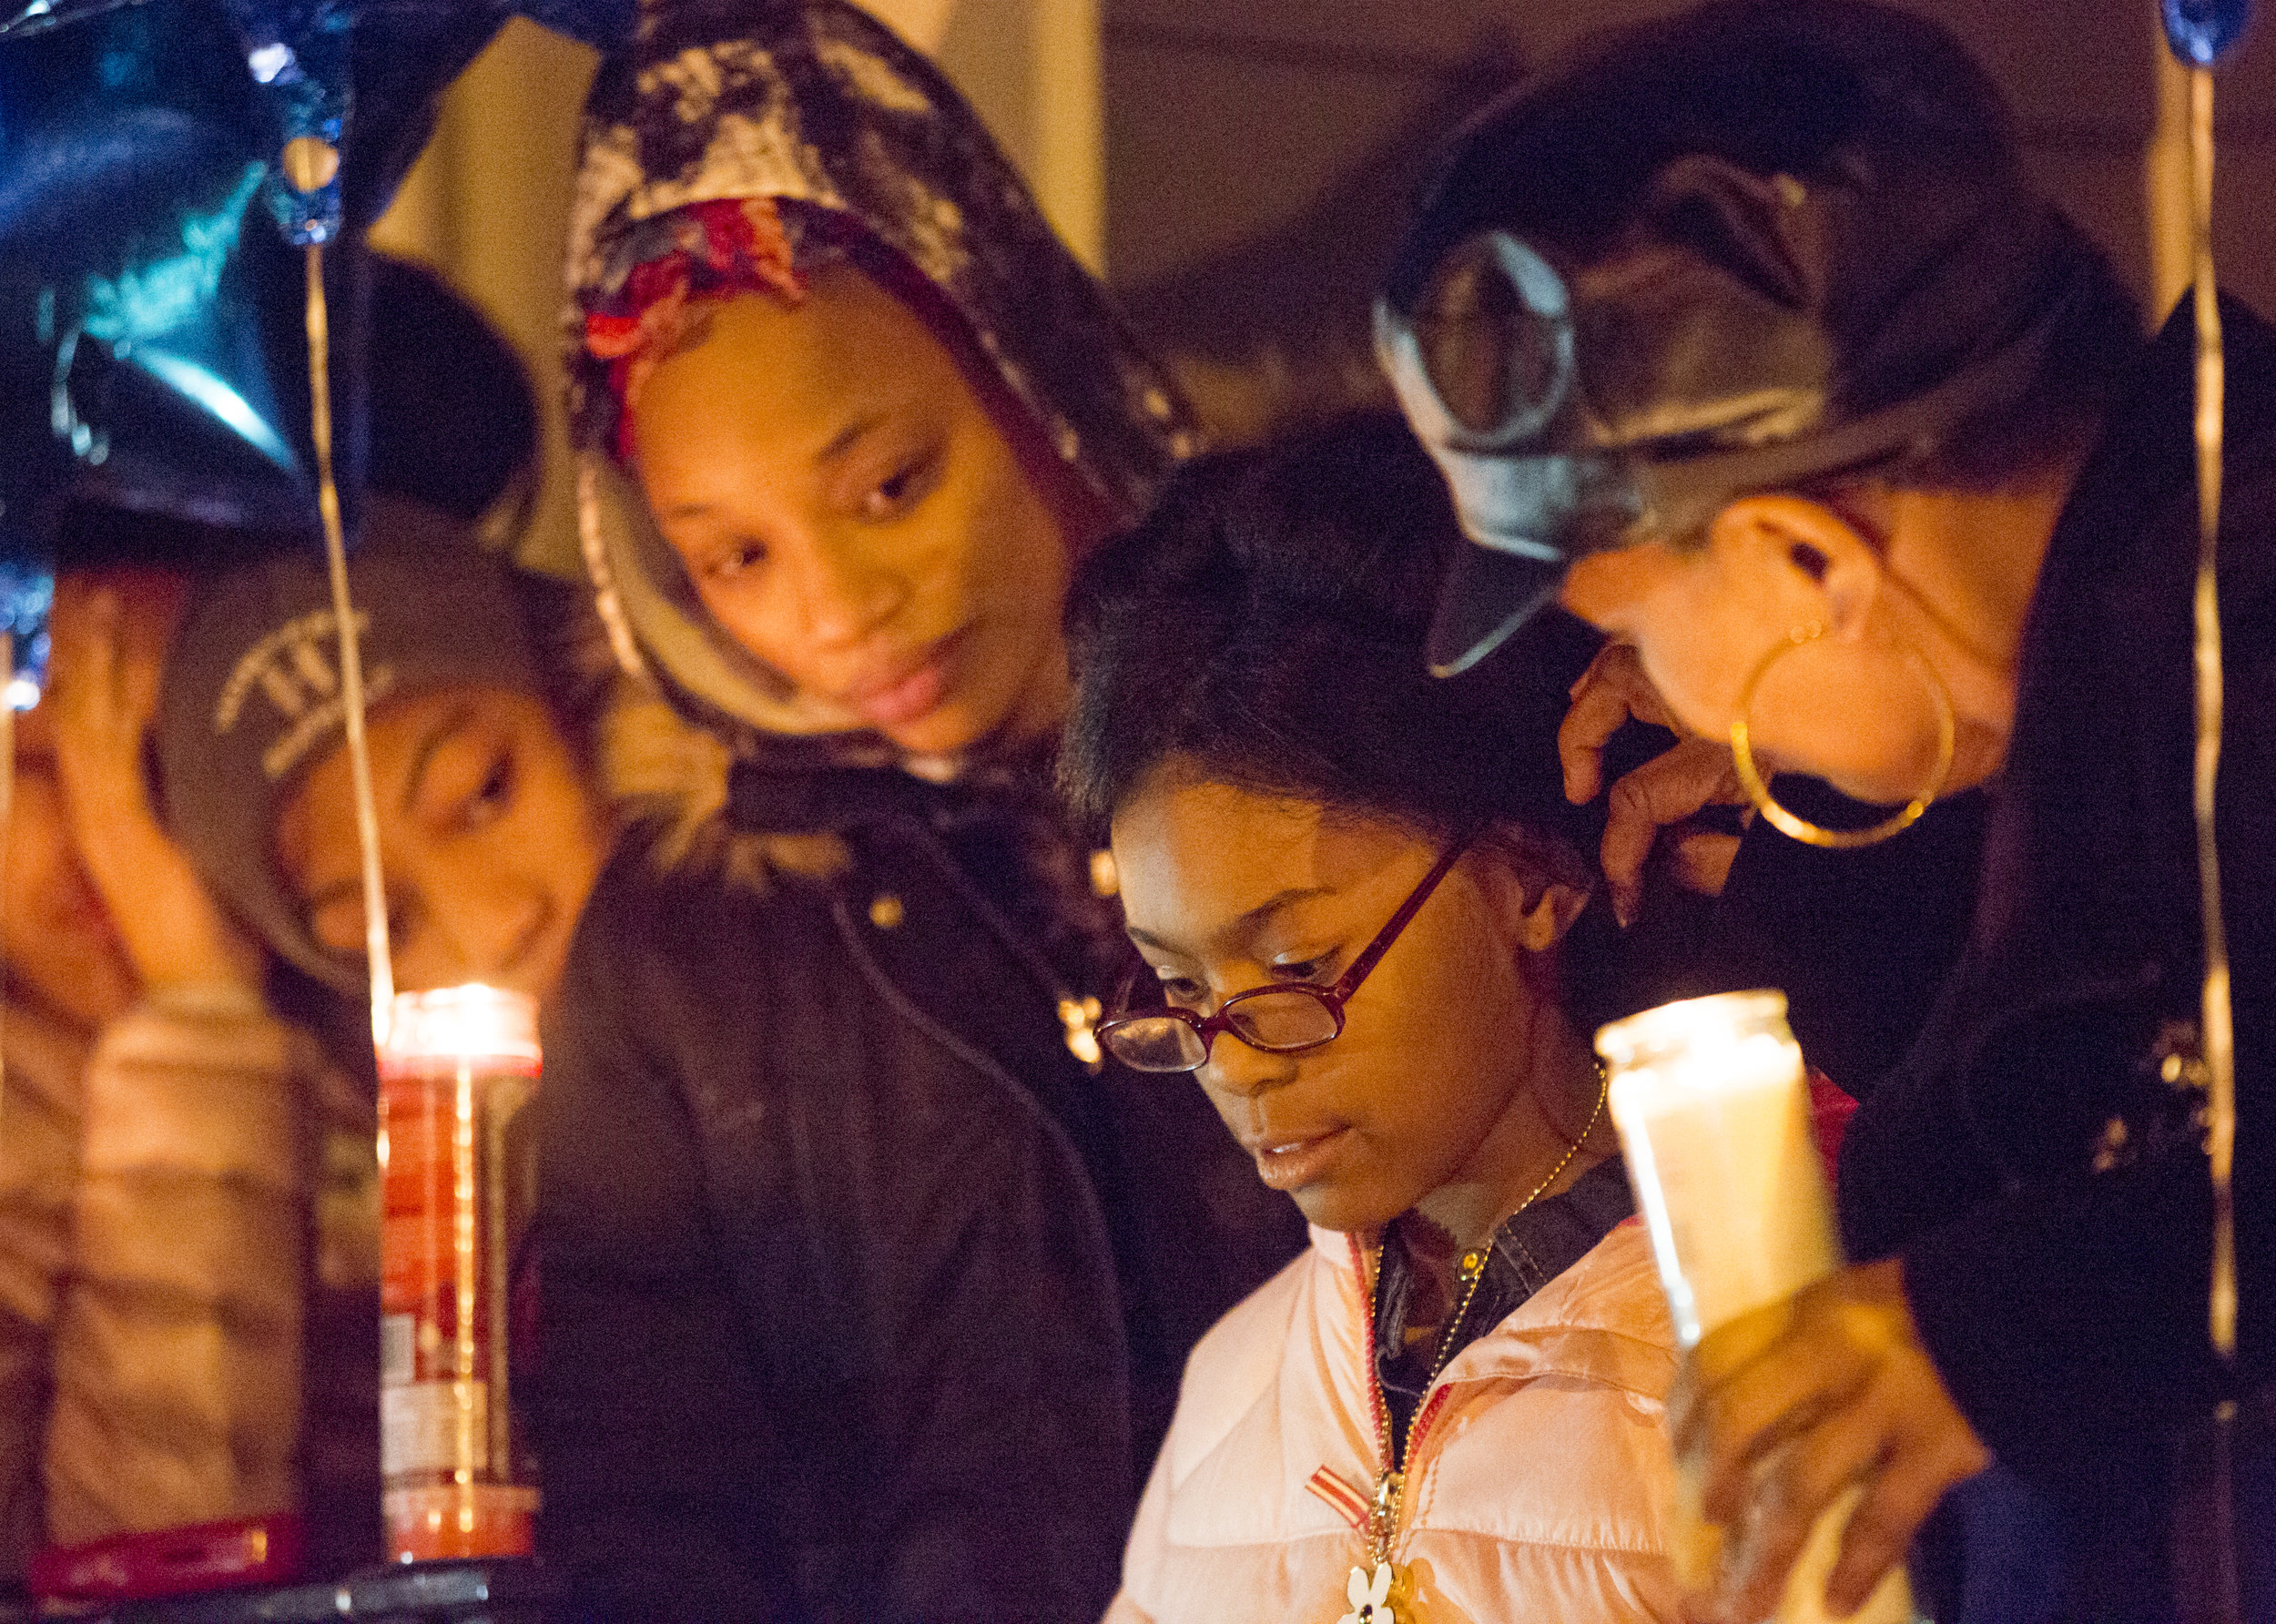  Jayla Burroughs, 8, the daughter of Matthew Burroughs, talks about how much she’ll miss her father during a vigil held in his honor outside of his apartment in Niles, Ohio on Jan. 5, 2019. Matthew Burroughs was shot and killed a few days earlier by 